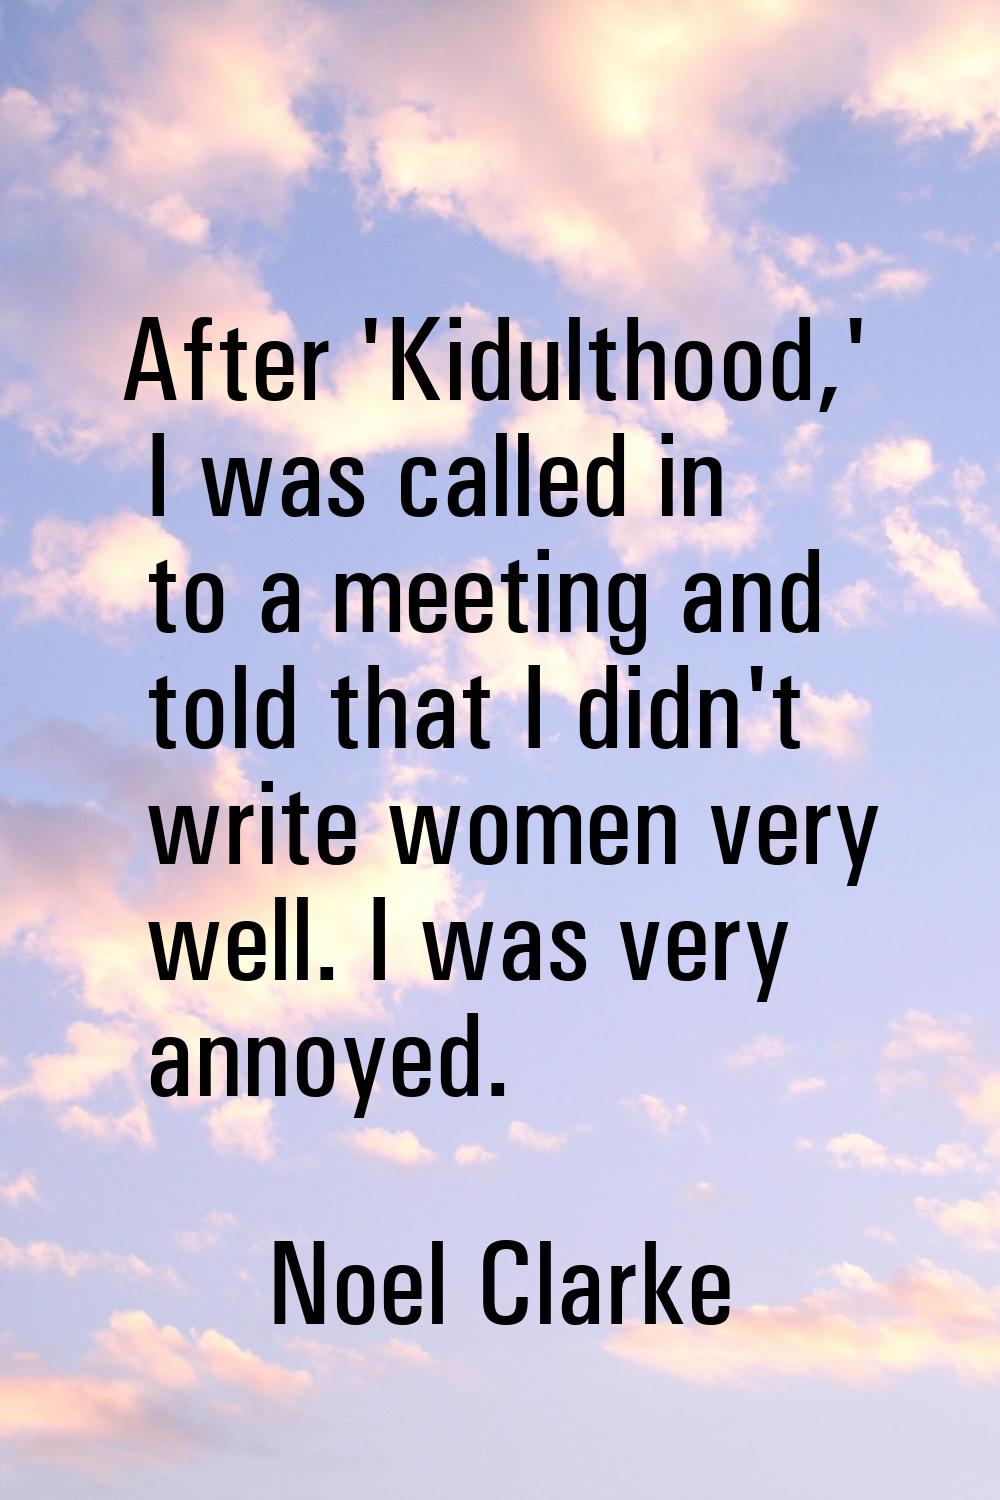 After 'Kidulthood,' I was called in to a meeting and told that I didn't write women very well. I wa